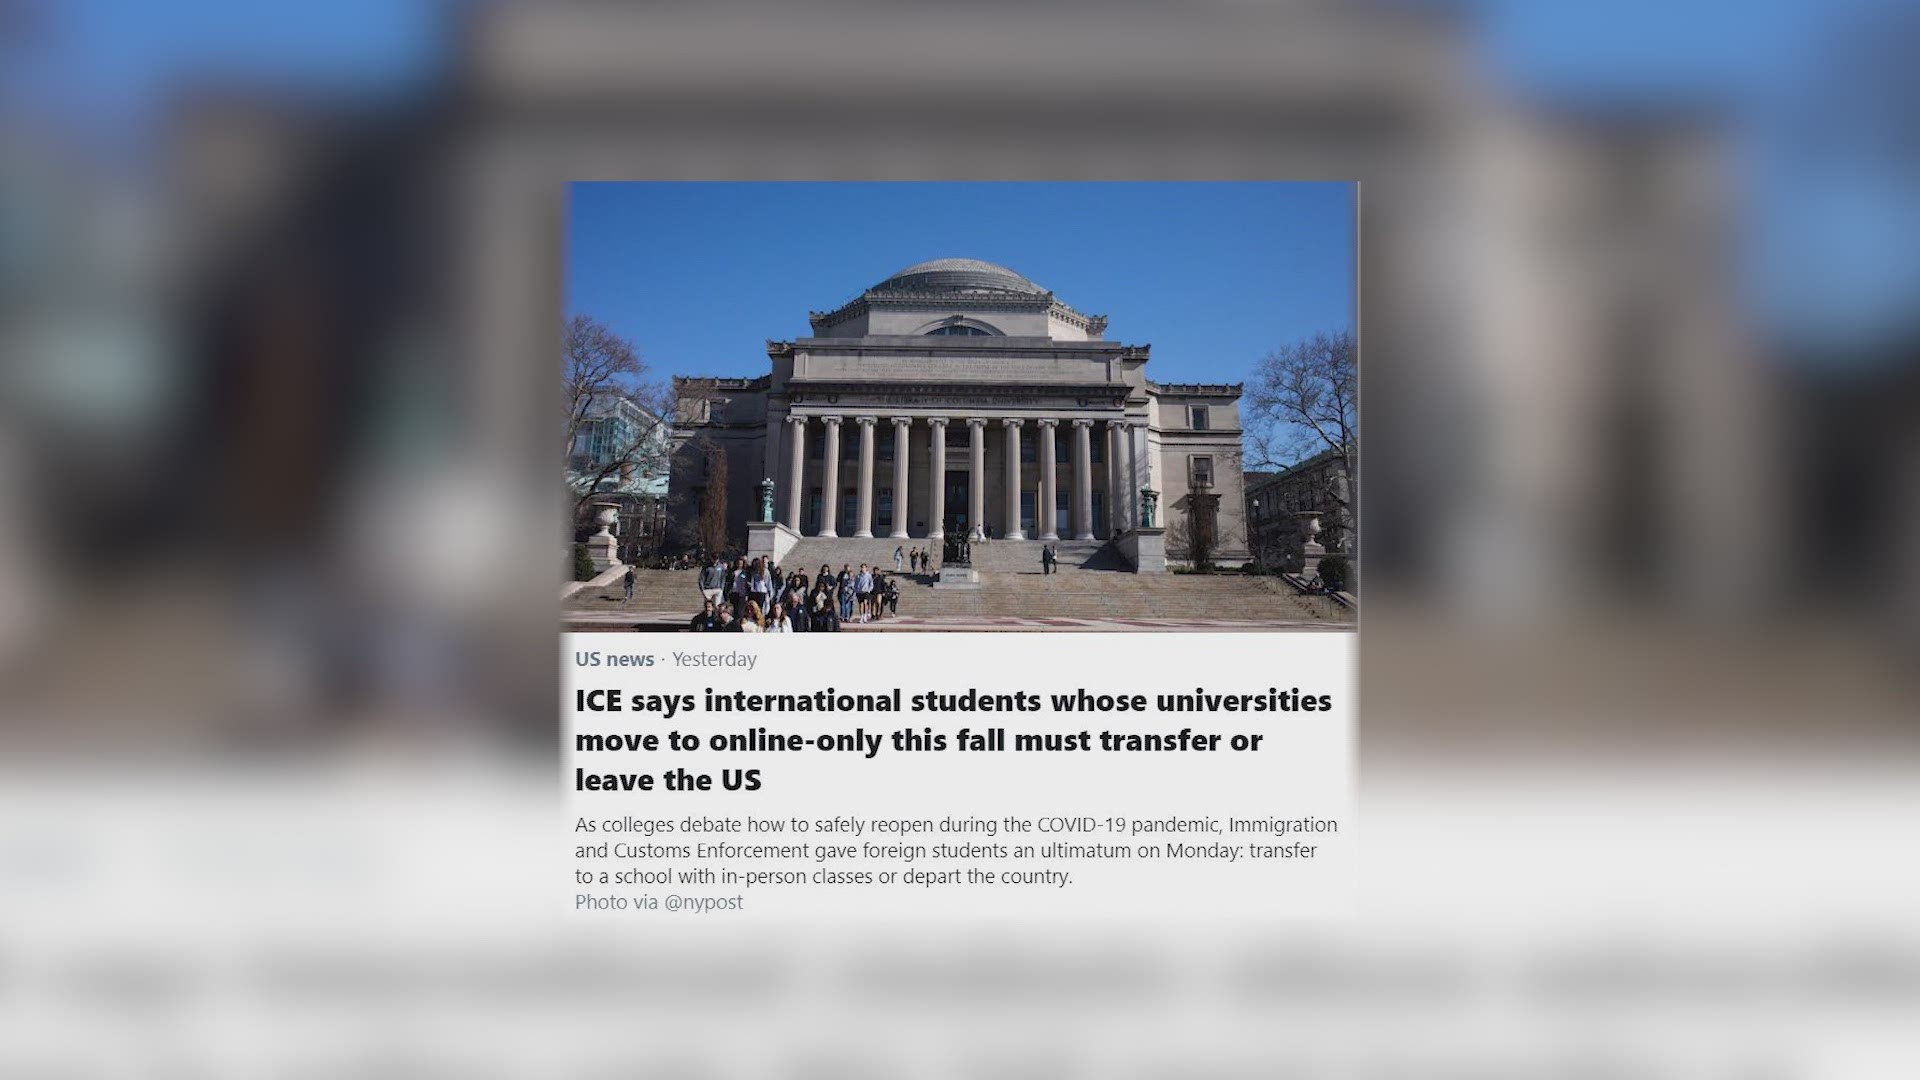 International students must take classes in person in order to stay in the United States, ICE rules.